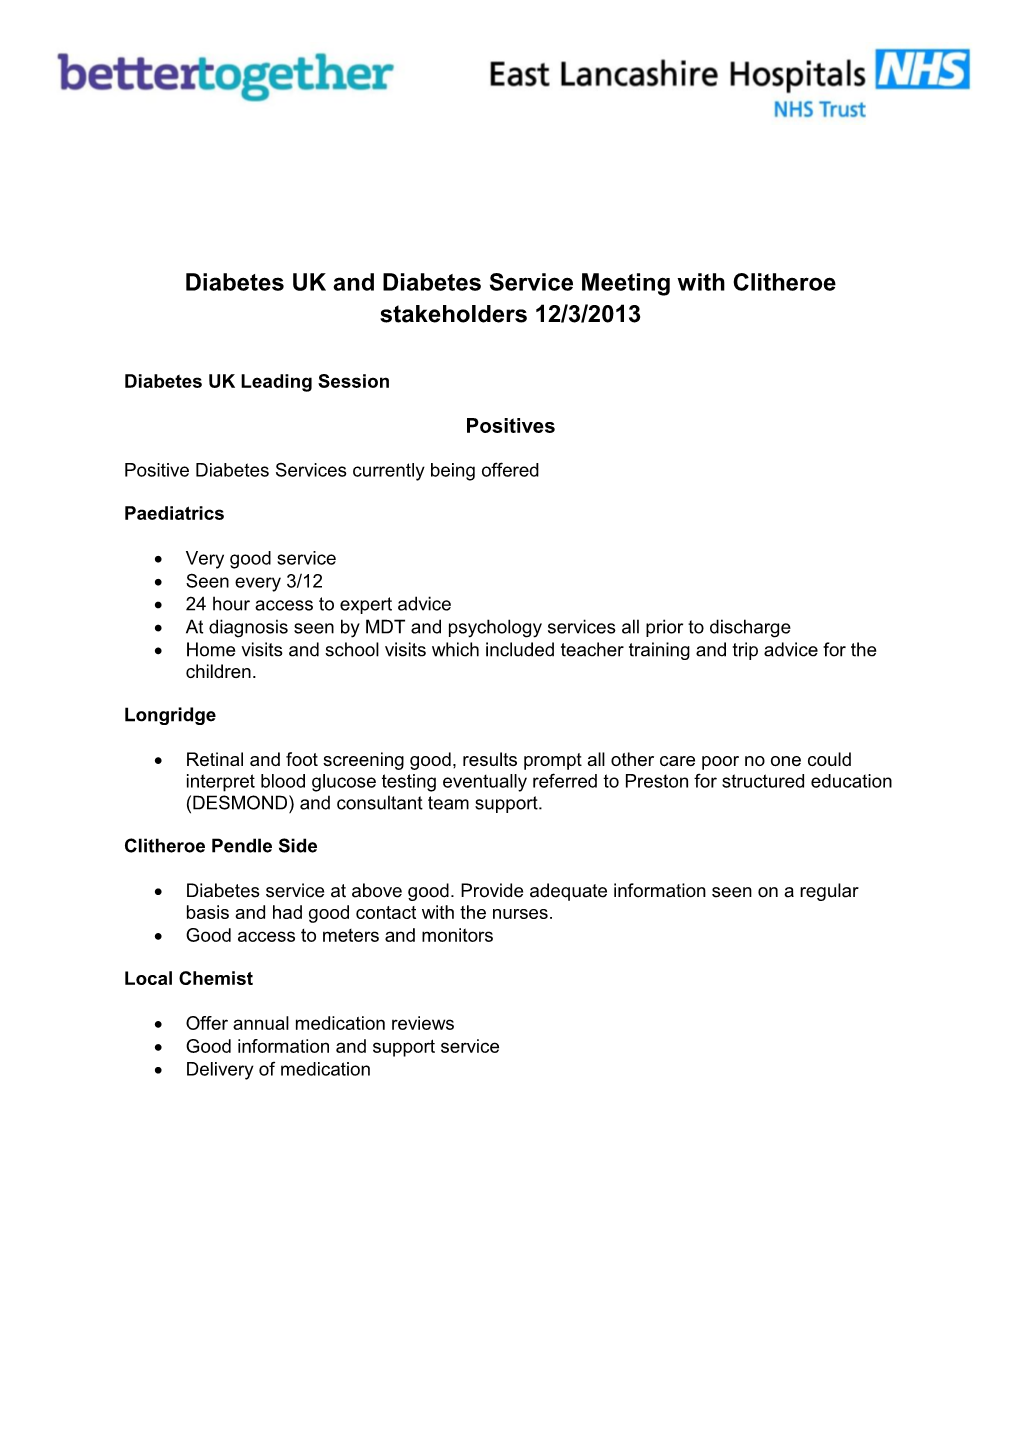 Diabetes UK and Diabetes Service Meeting with Clitheroe Stakeholders 12/3/2013